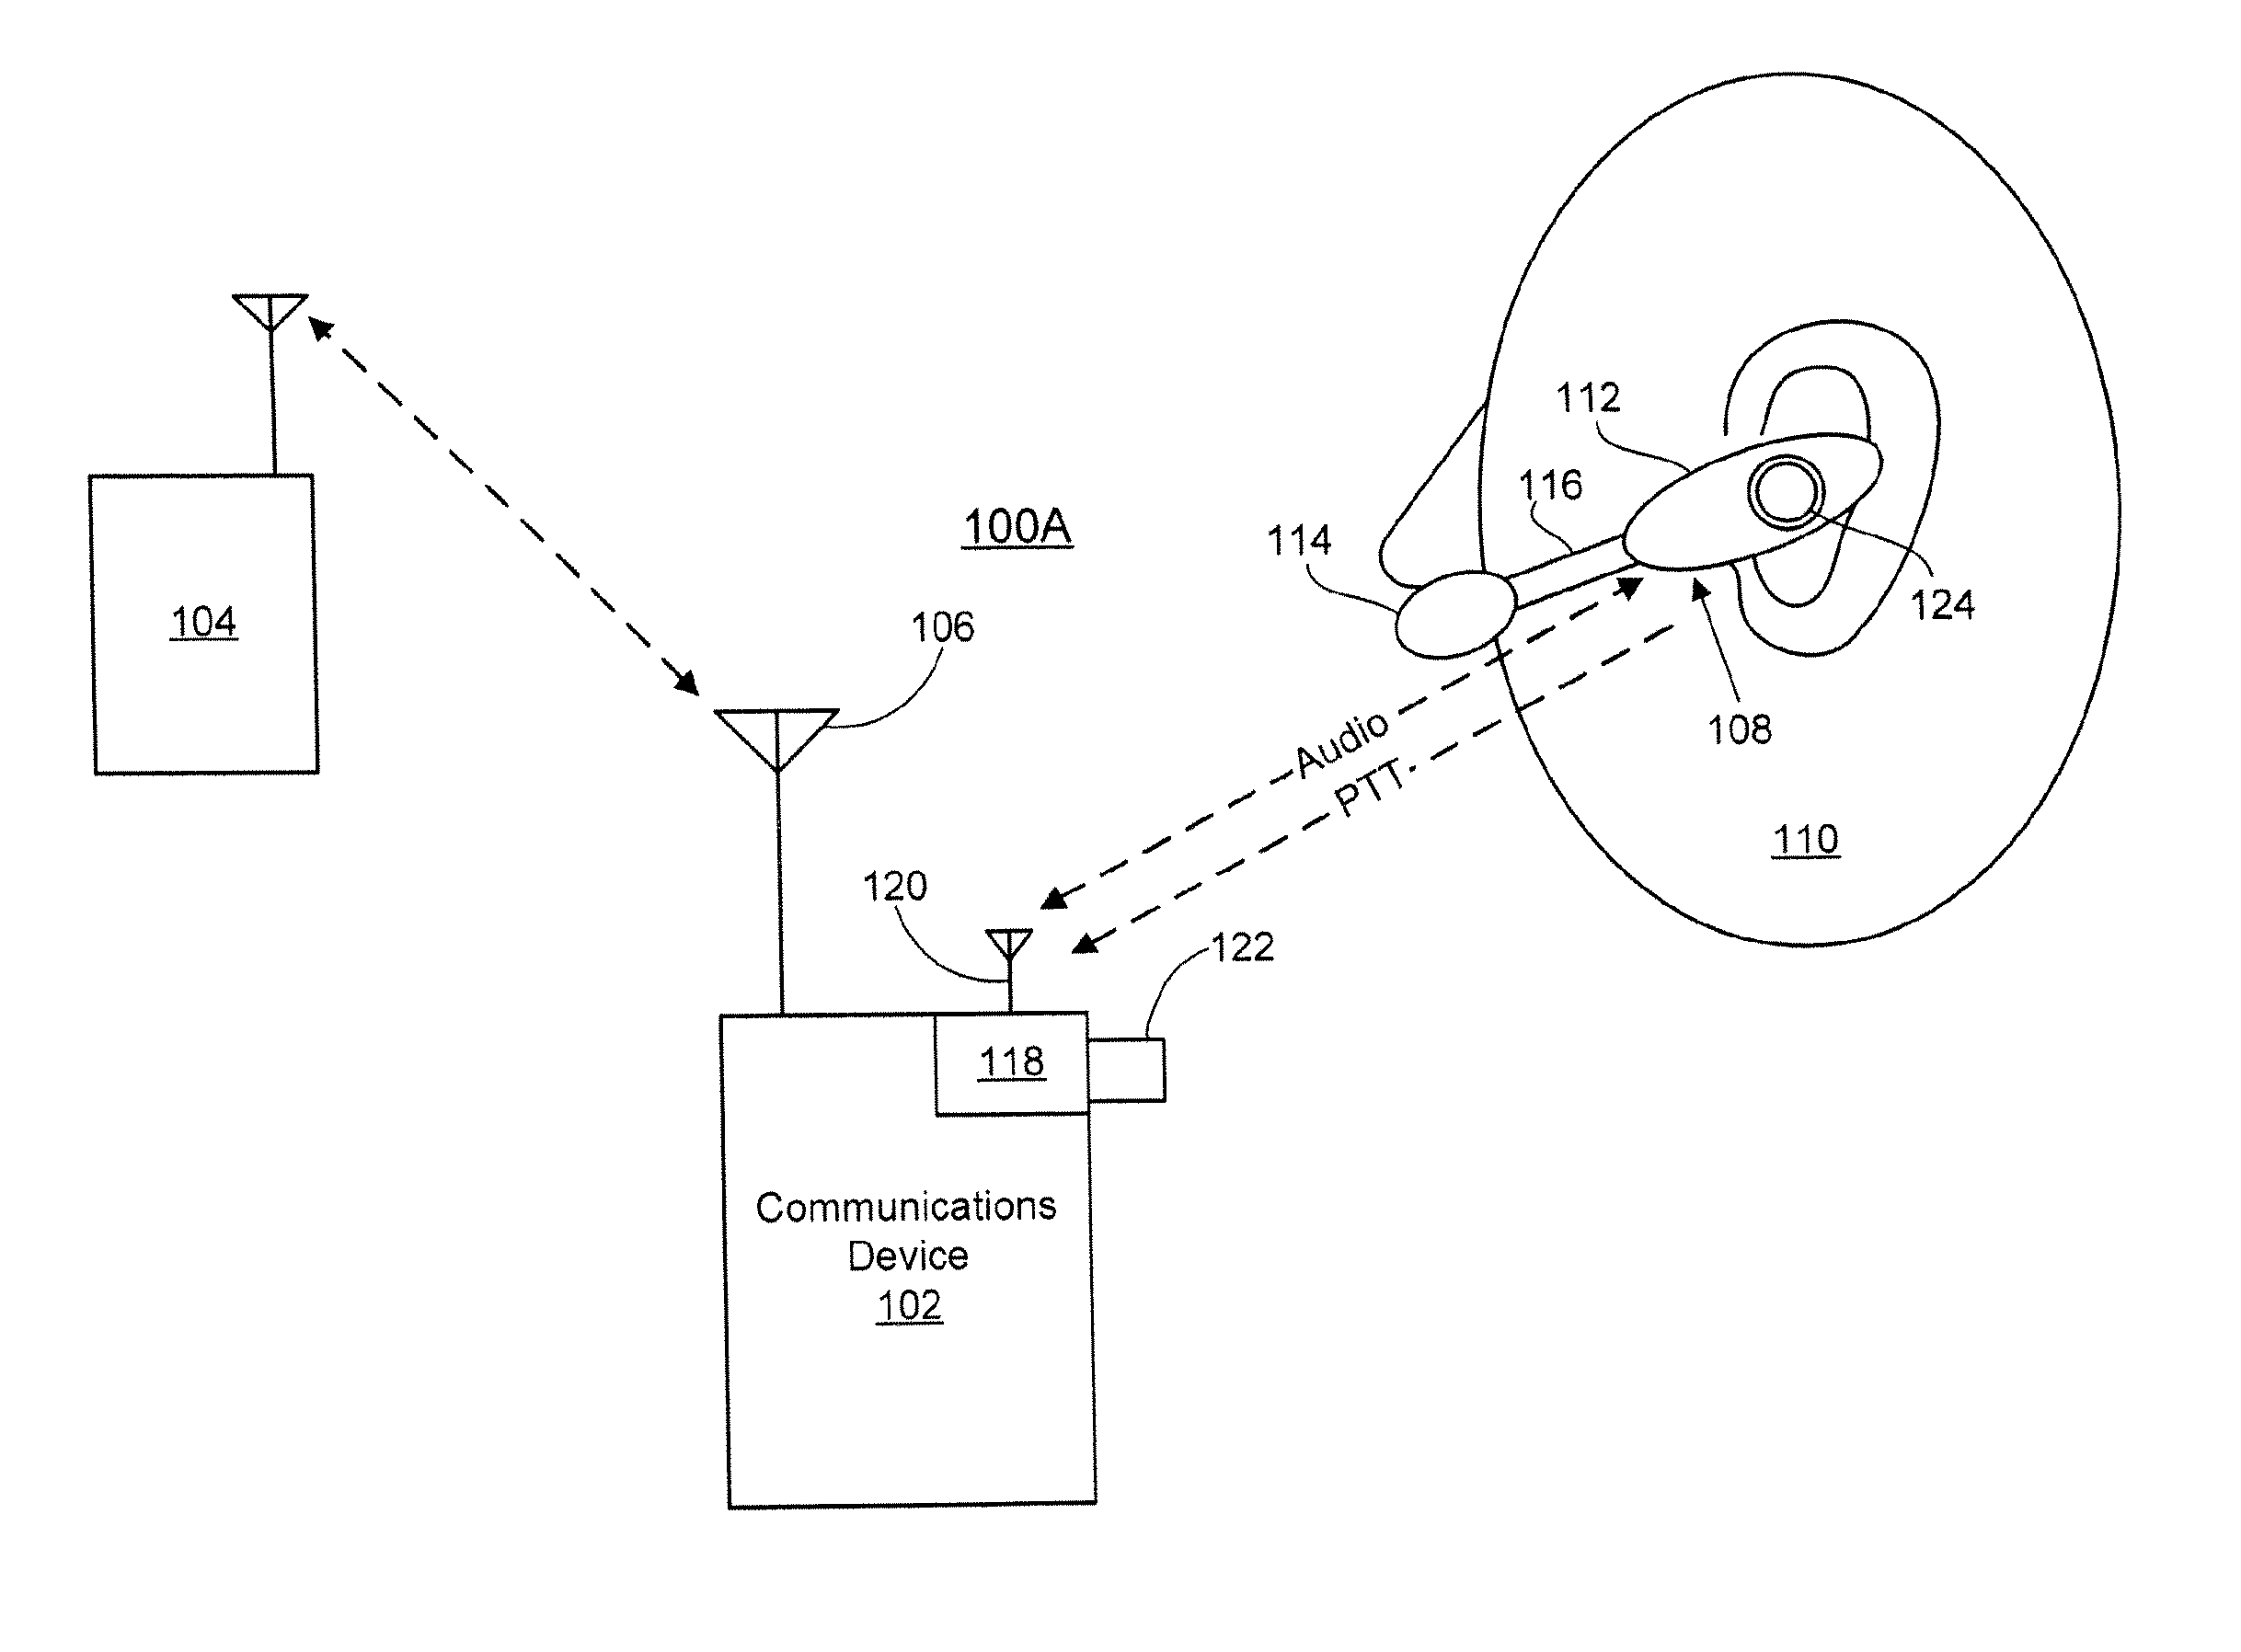 Wireless headset and microphone assembly for communications device